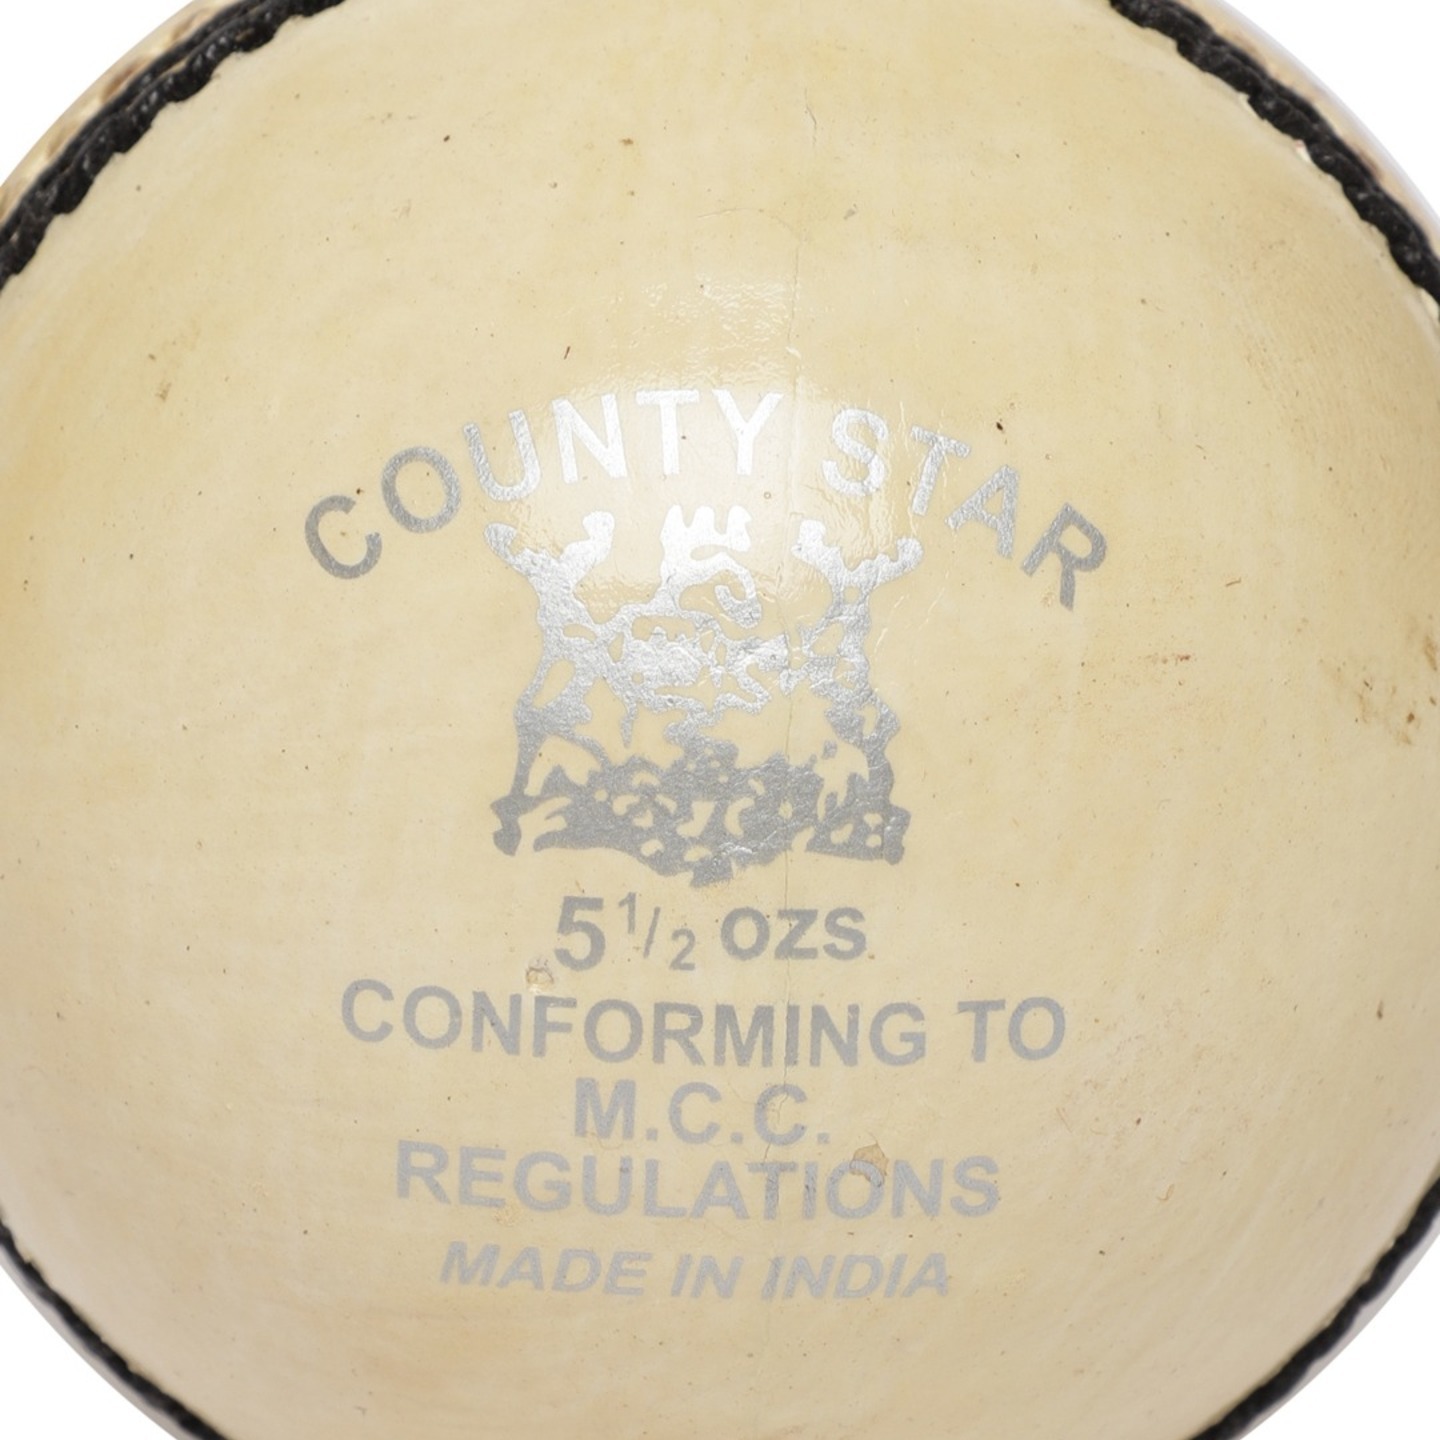 GM COUNTY STAR WHITE LEATHER CRICKET BALL